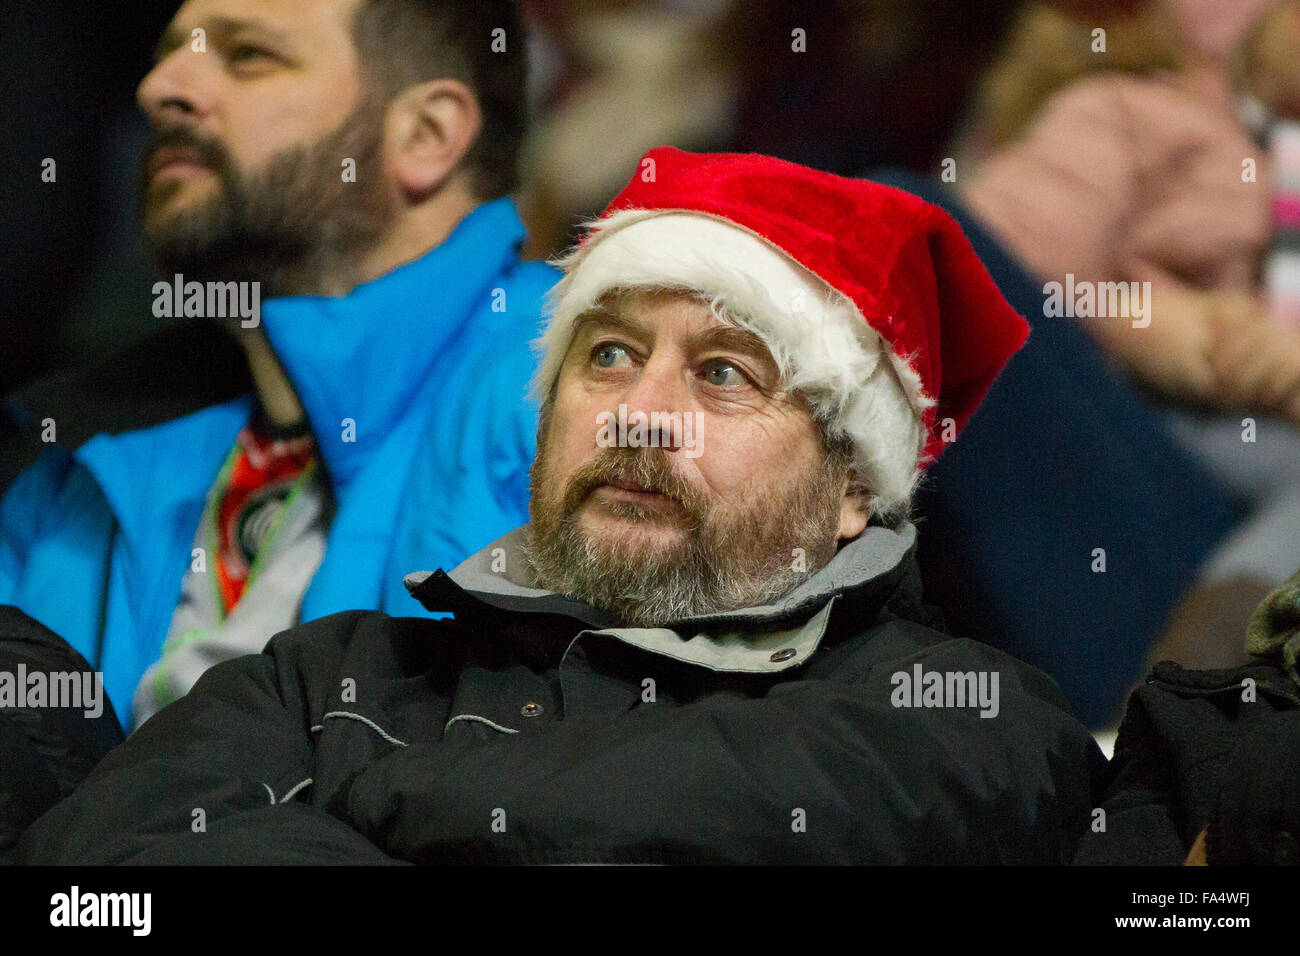 Leicester, England, 20th, December, 2015.  ERCC Leicester v Munster Supporter with Santa hat Stock Photo